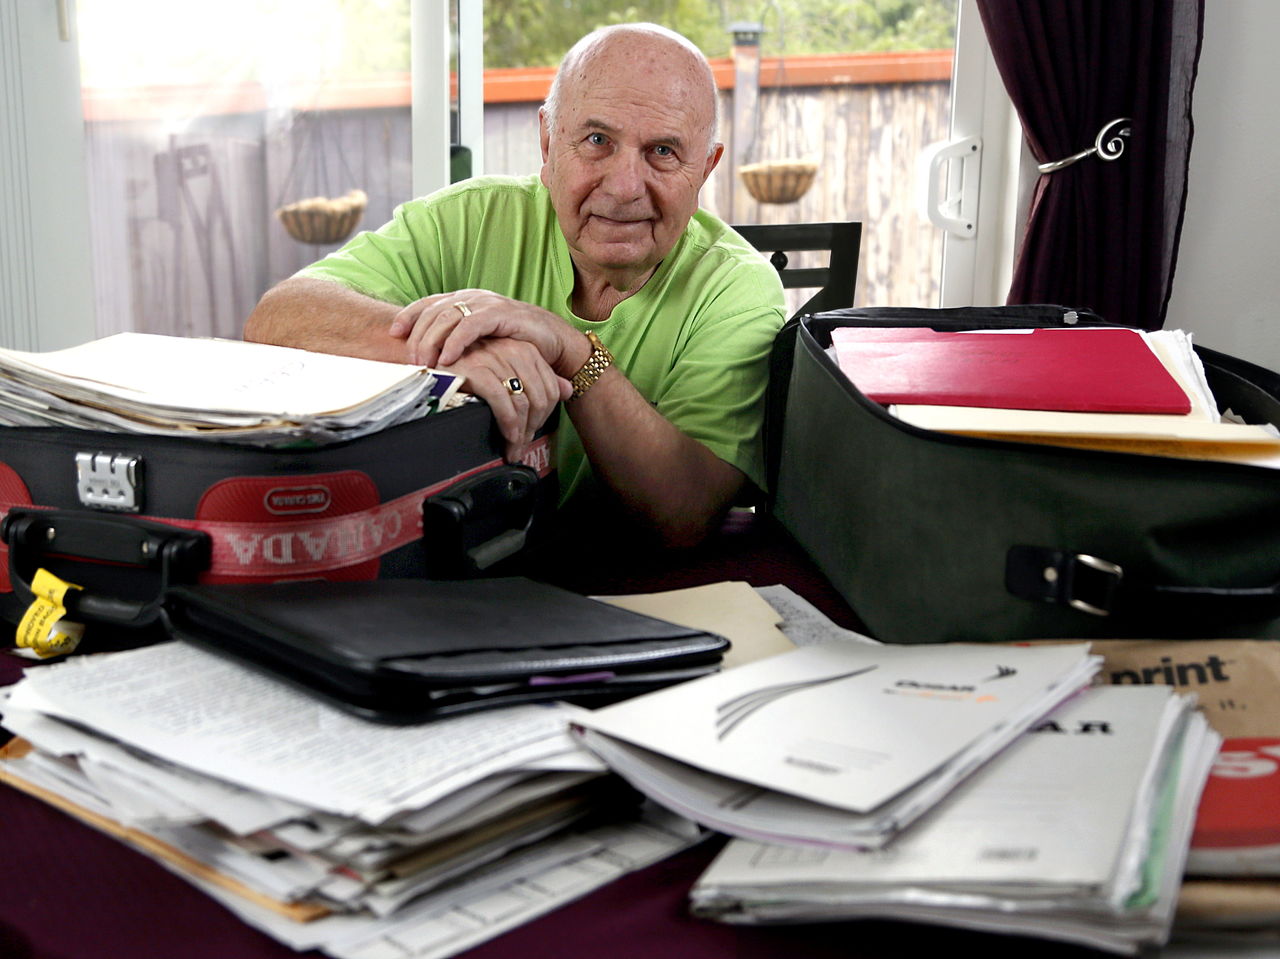 At his home in Lake Stevens, Viorel Ciubuc pulls out just a few of his suitcases stuffed with paperwork from his eight-year-long suit against those who persecuted him in Romania. Despite odds against him in that part of the world, his suit was successful.